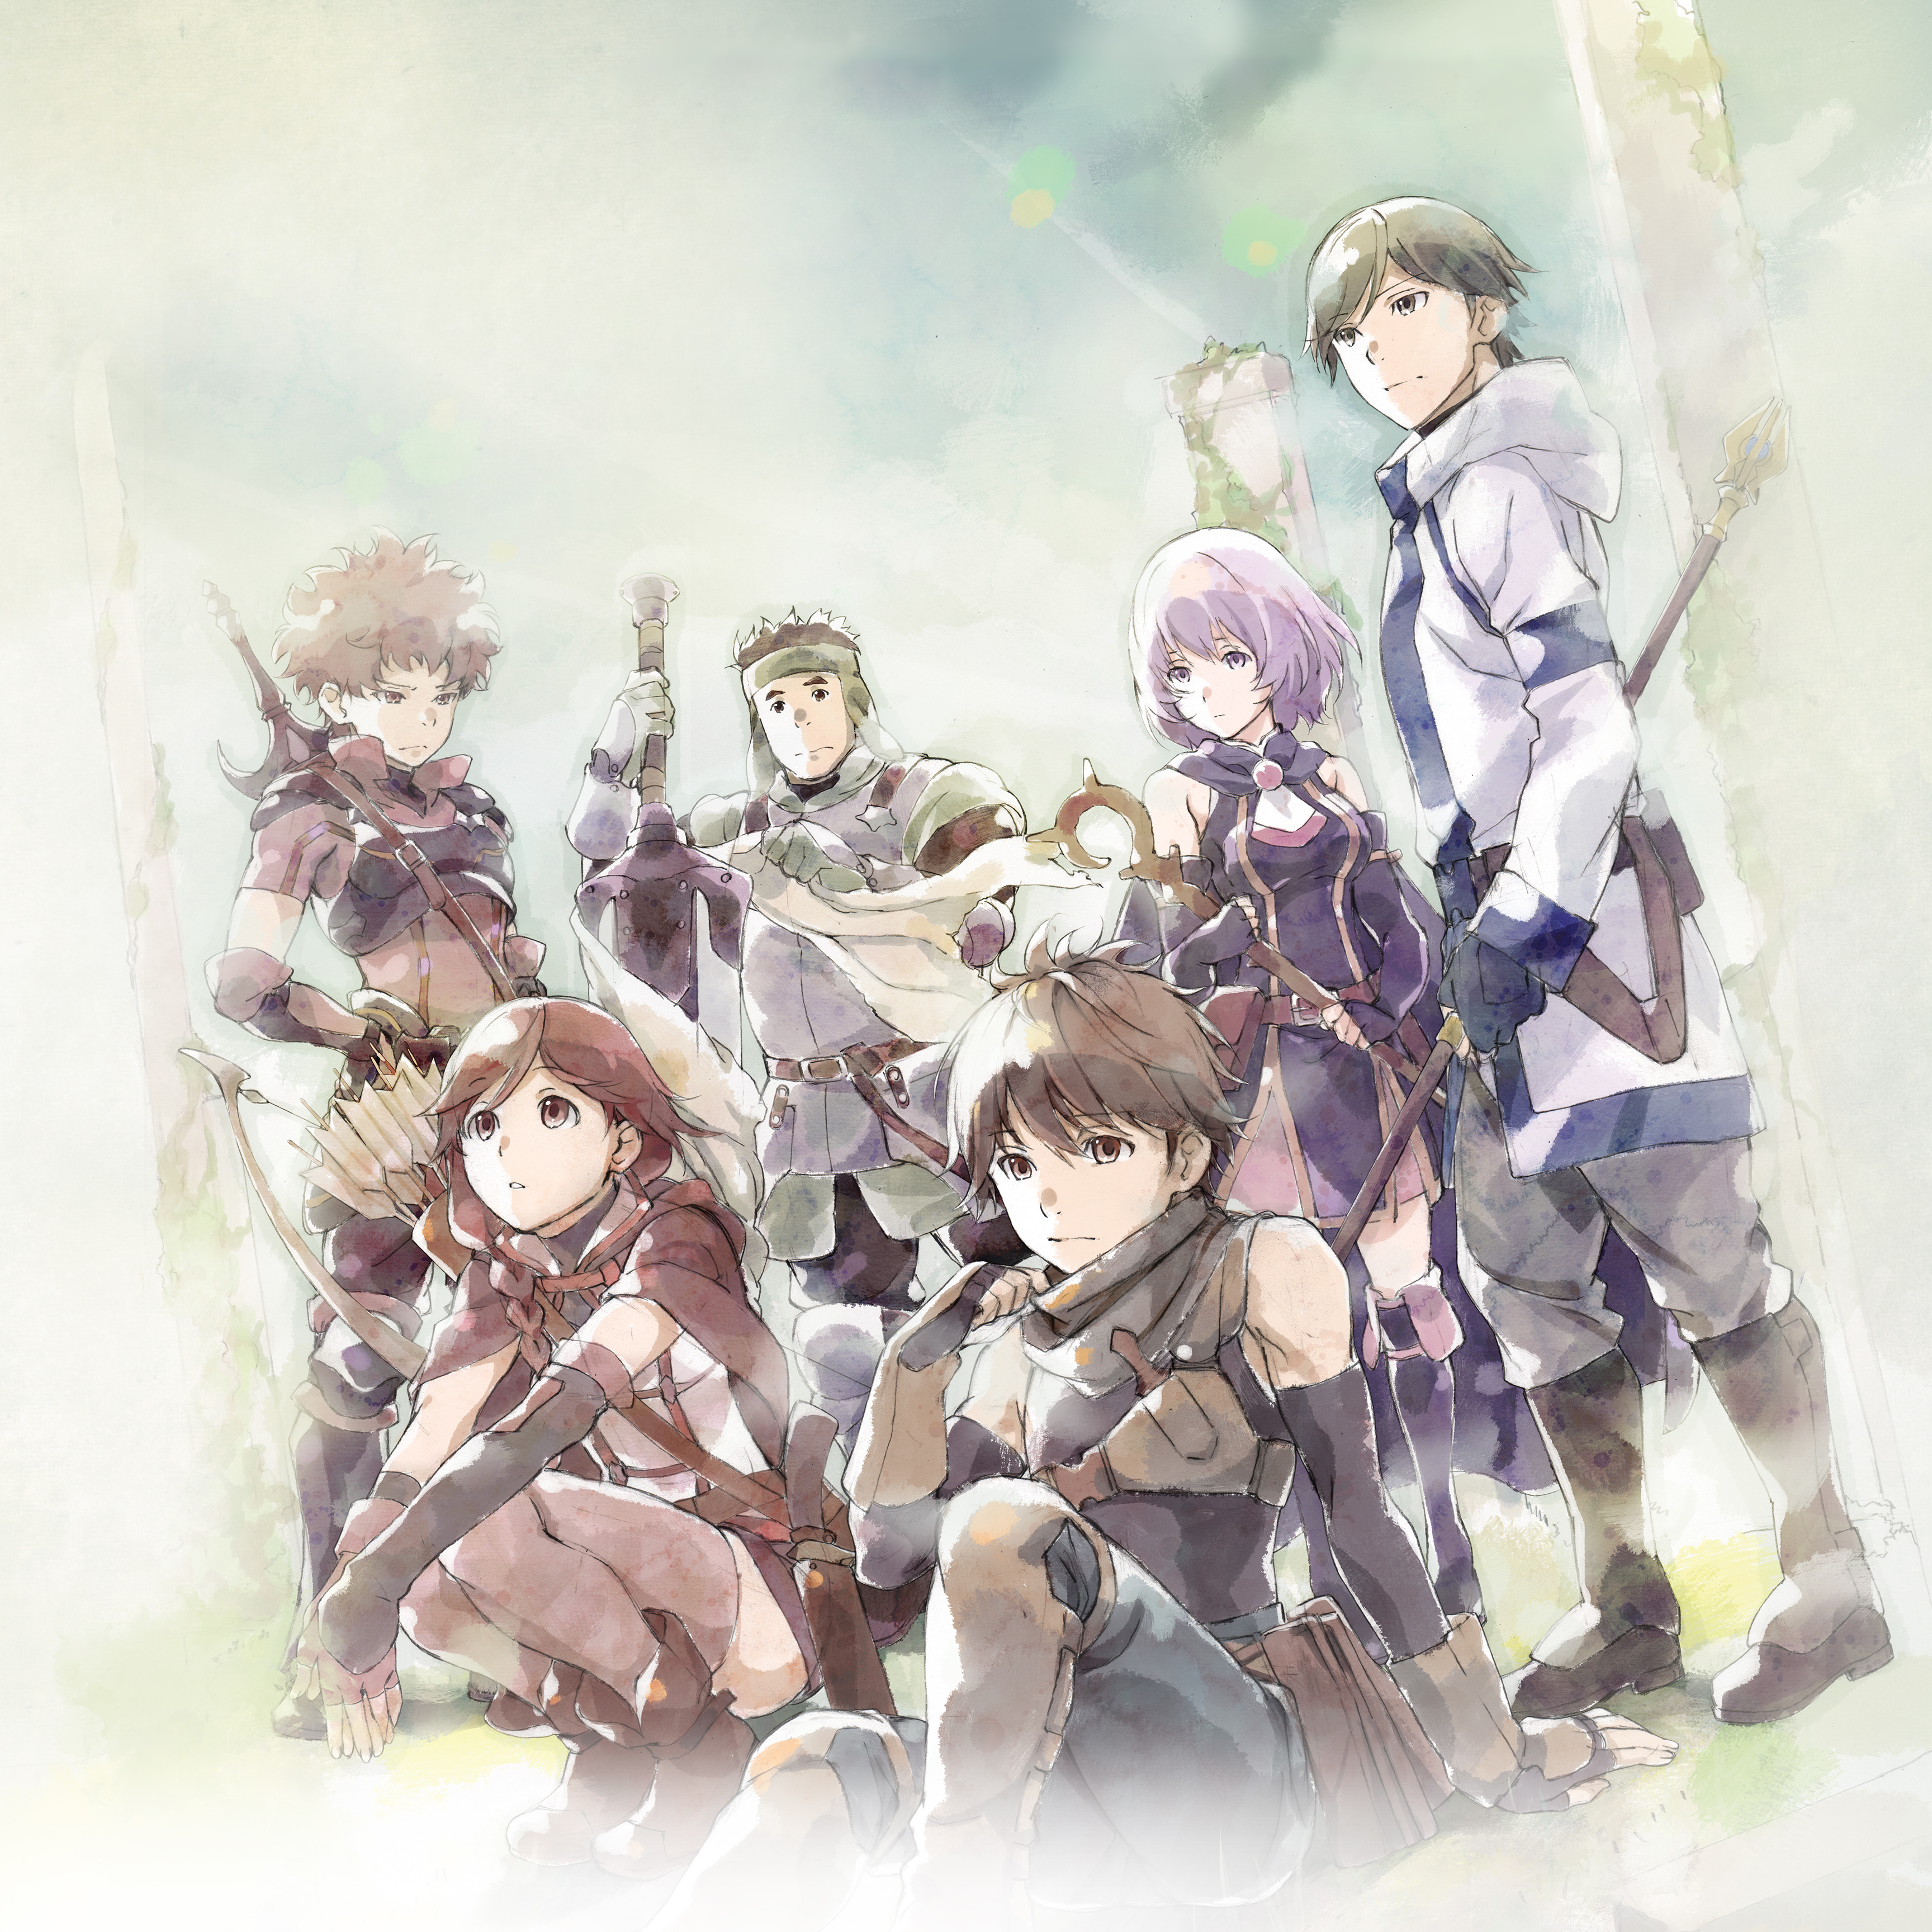 Grimgar, Ashes and Illusions Season 1: Where To Watch Every